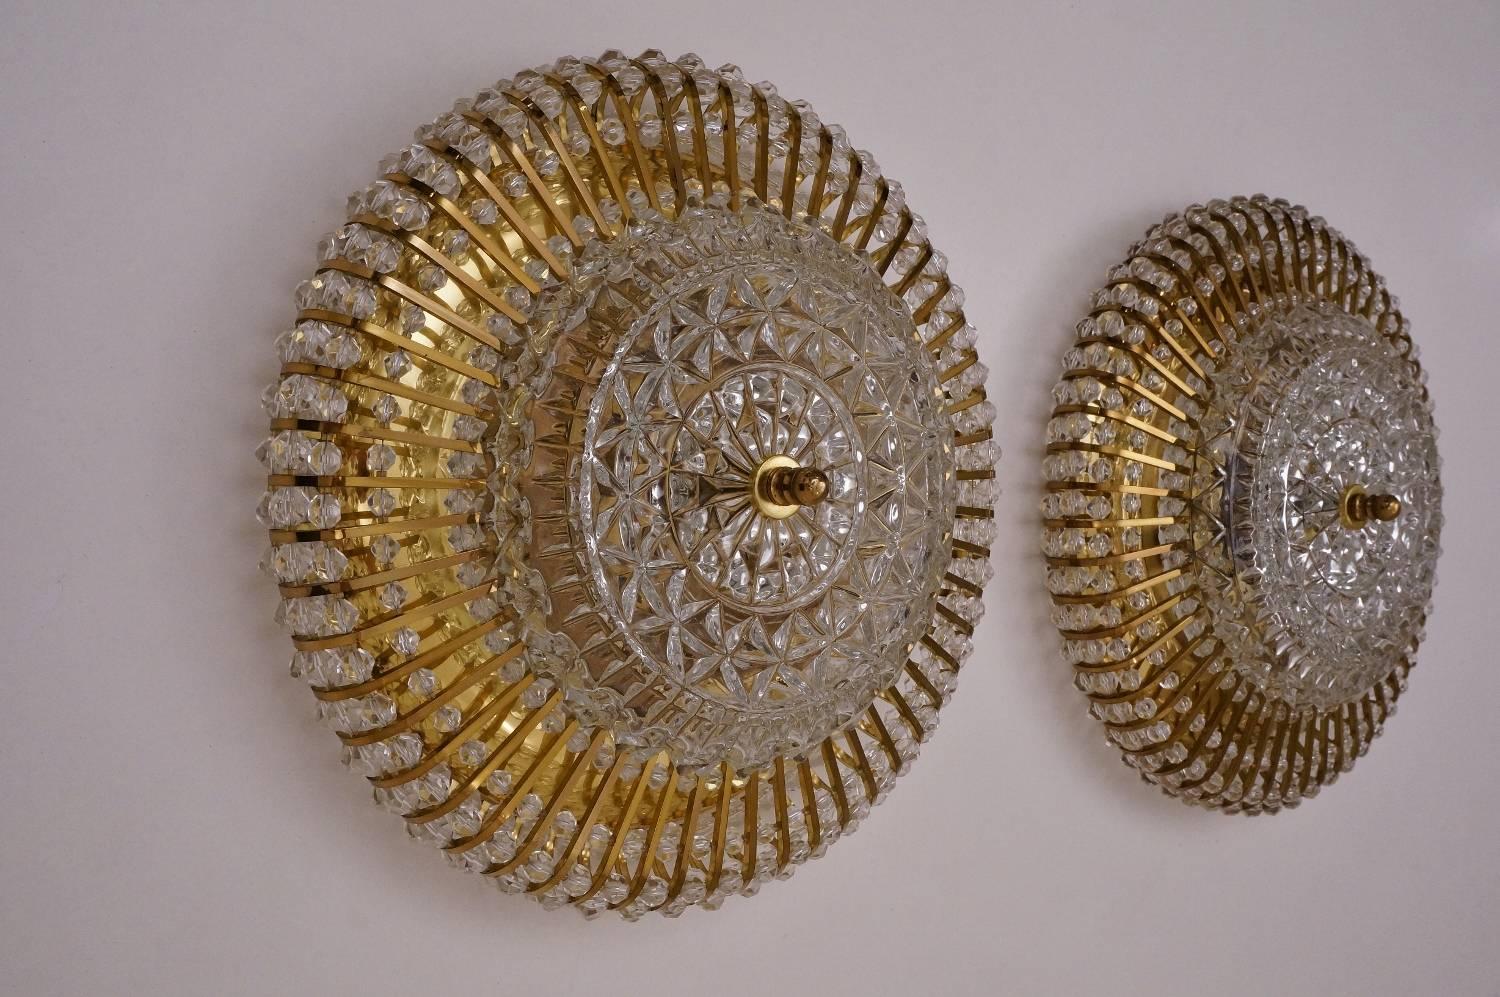 Hollywood Regency Hillebrand Brass, Glass and Lucite Bead Large Pair of Lights, circa 1960s German